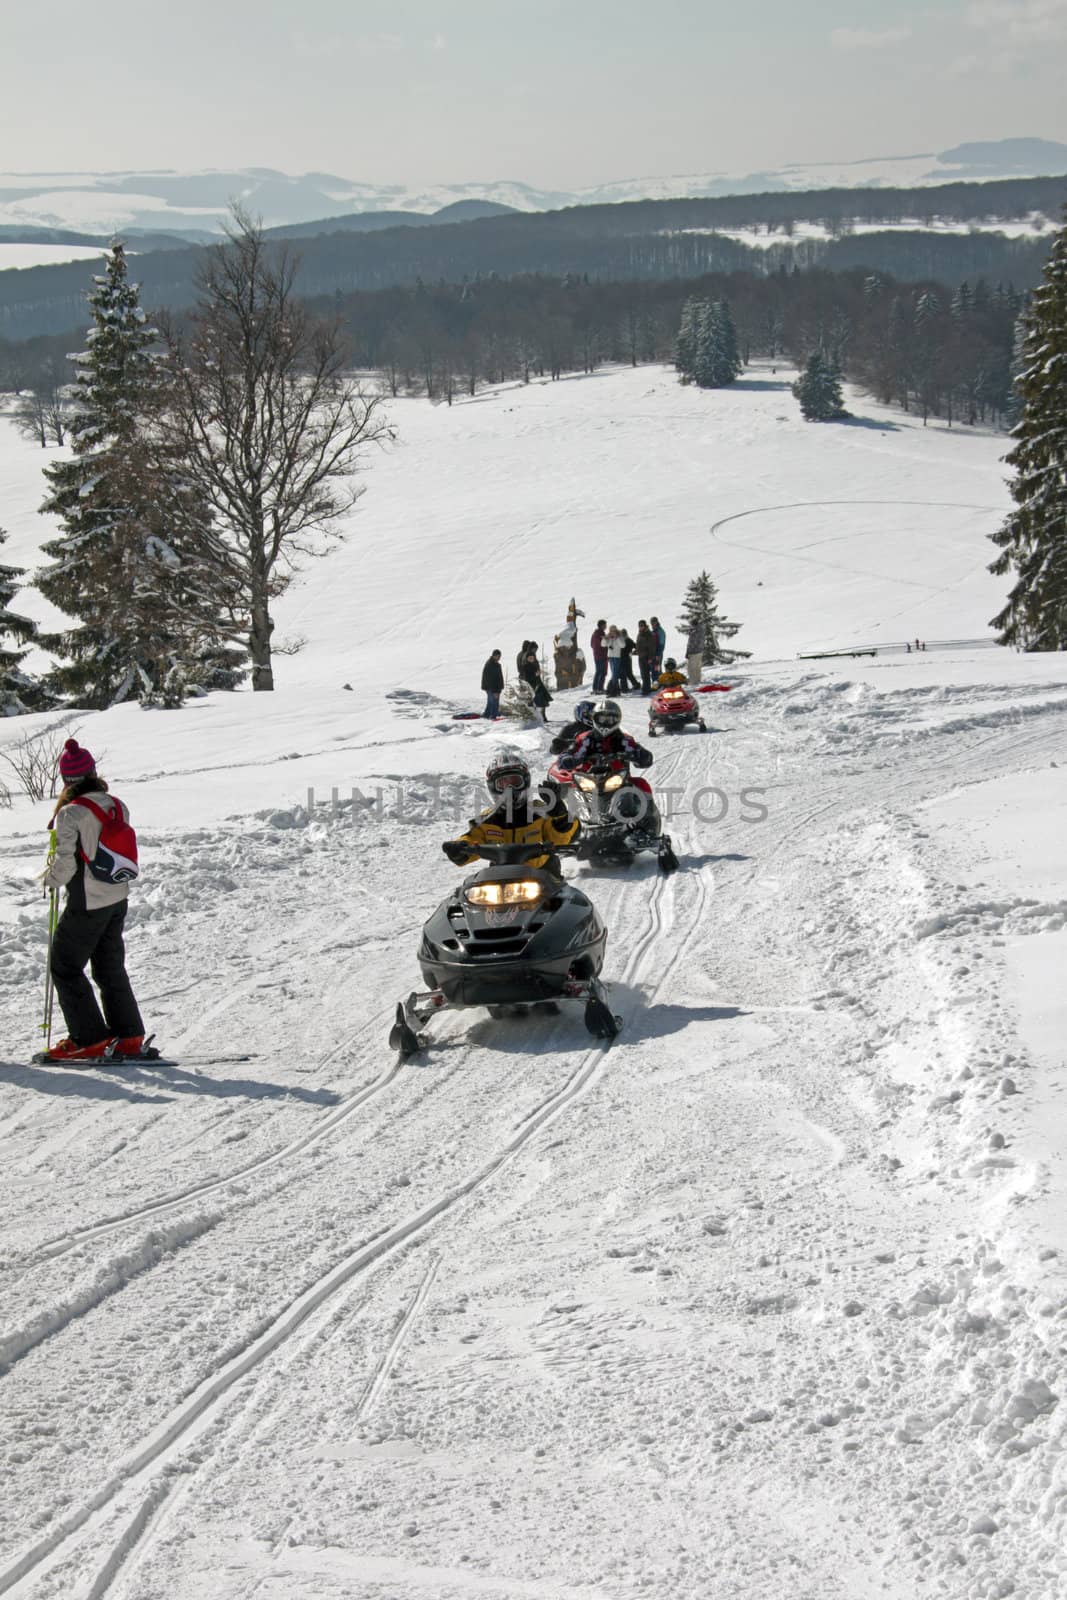 Some people riding on a snowmobile on a hillside